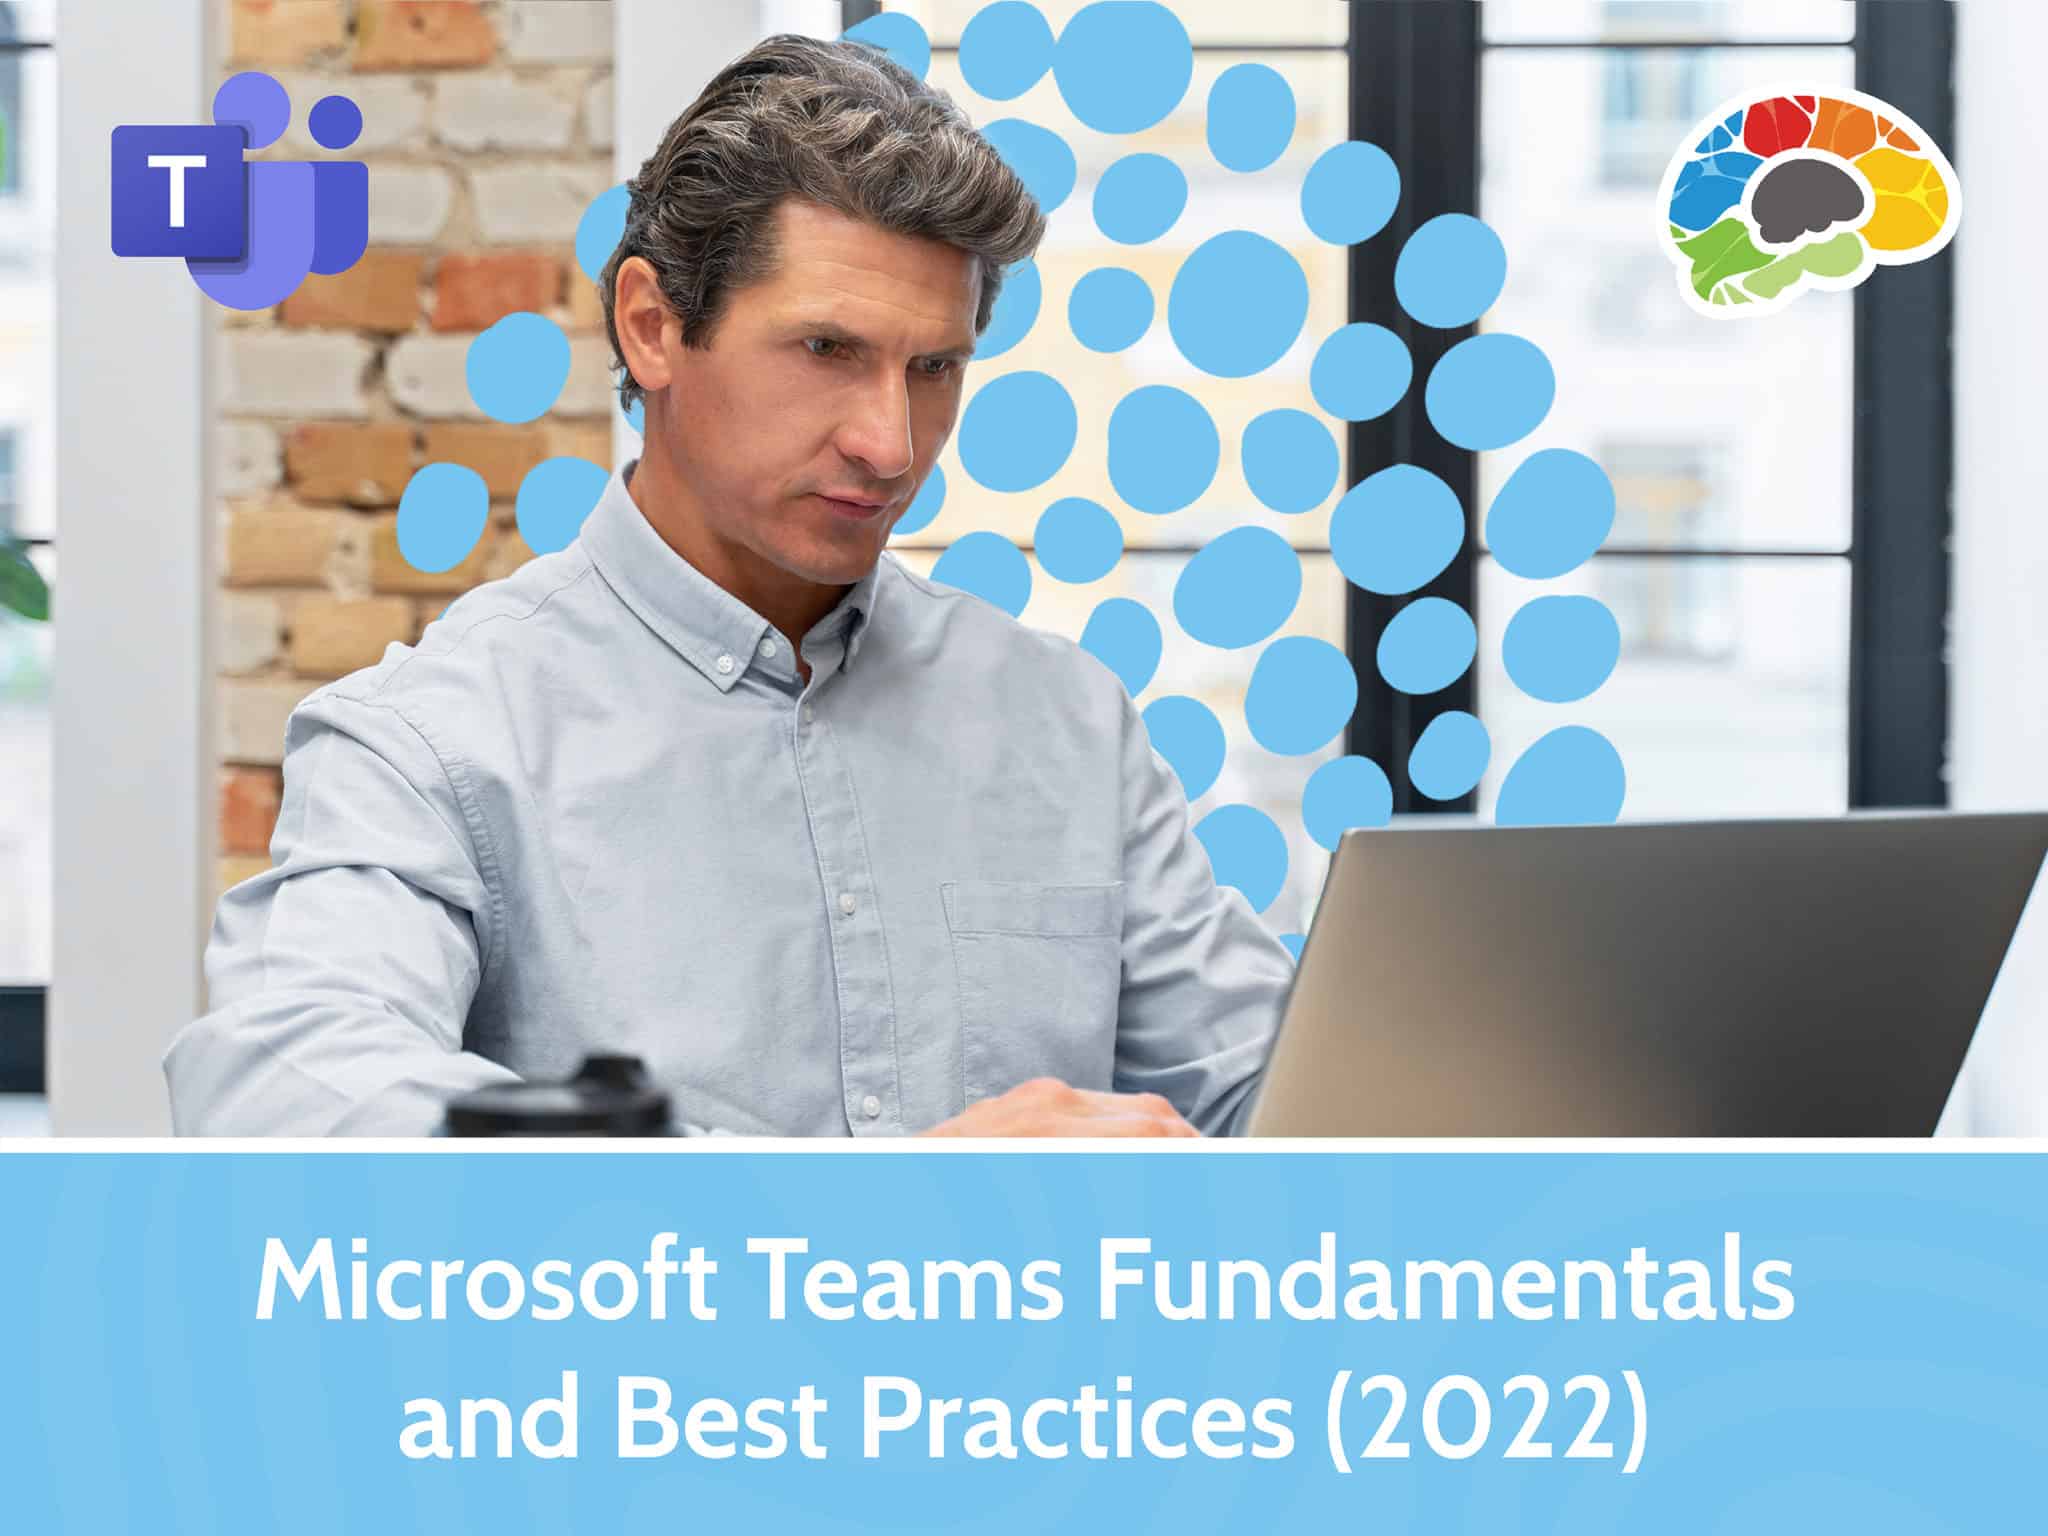 Microsoft Teams Fundamentals and Best Practices 2022 scaled